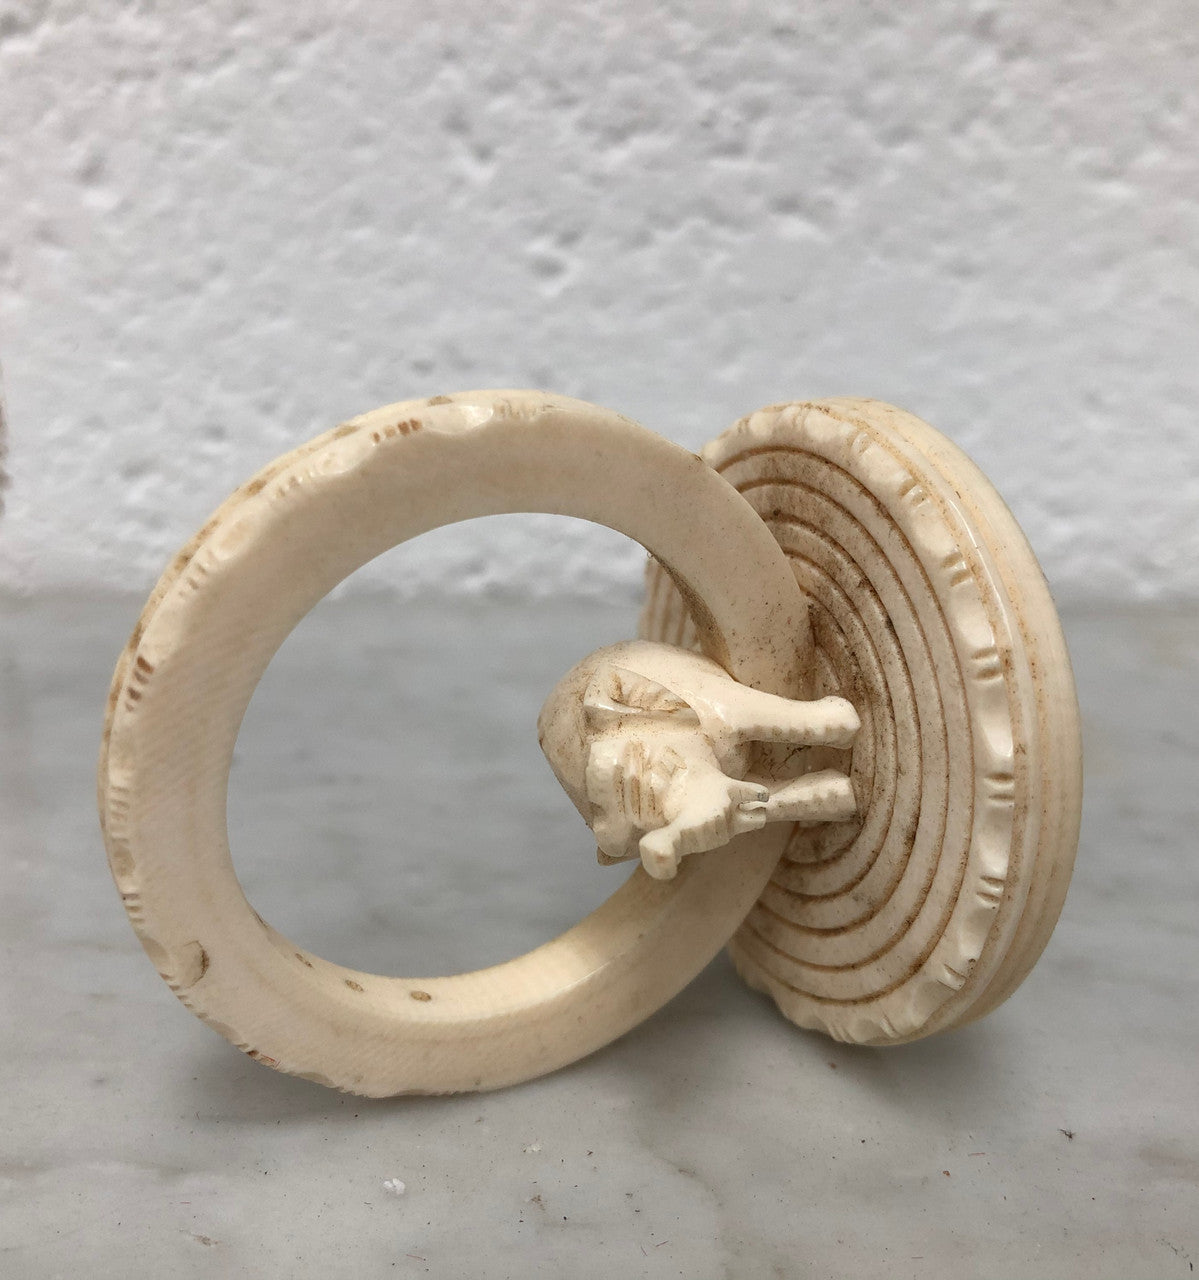 Unusual Antique carved Ivory serviette ring Featuring an Elephant. In good original condition.